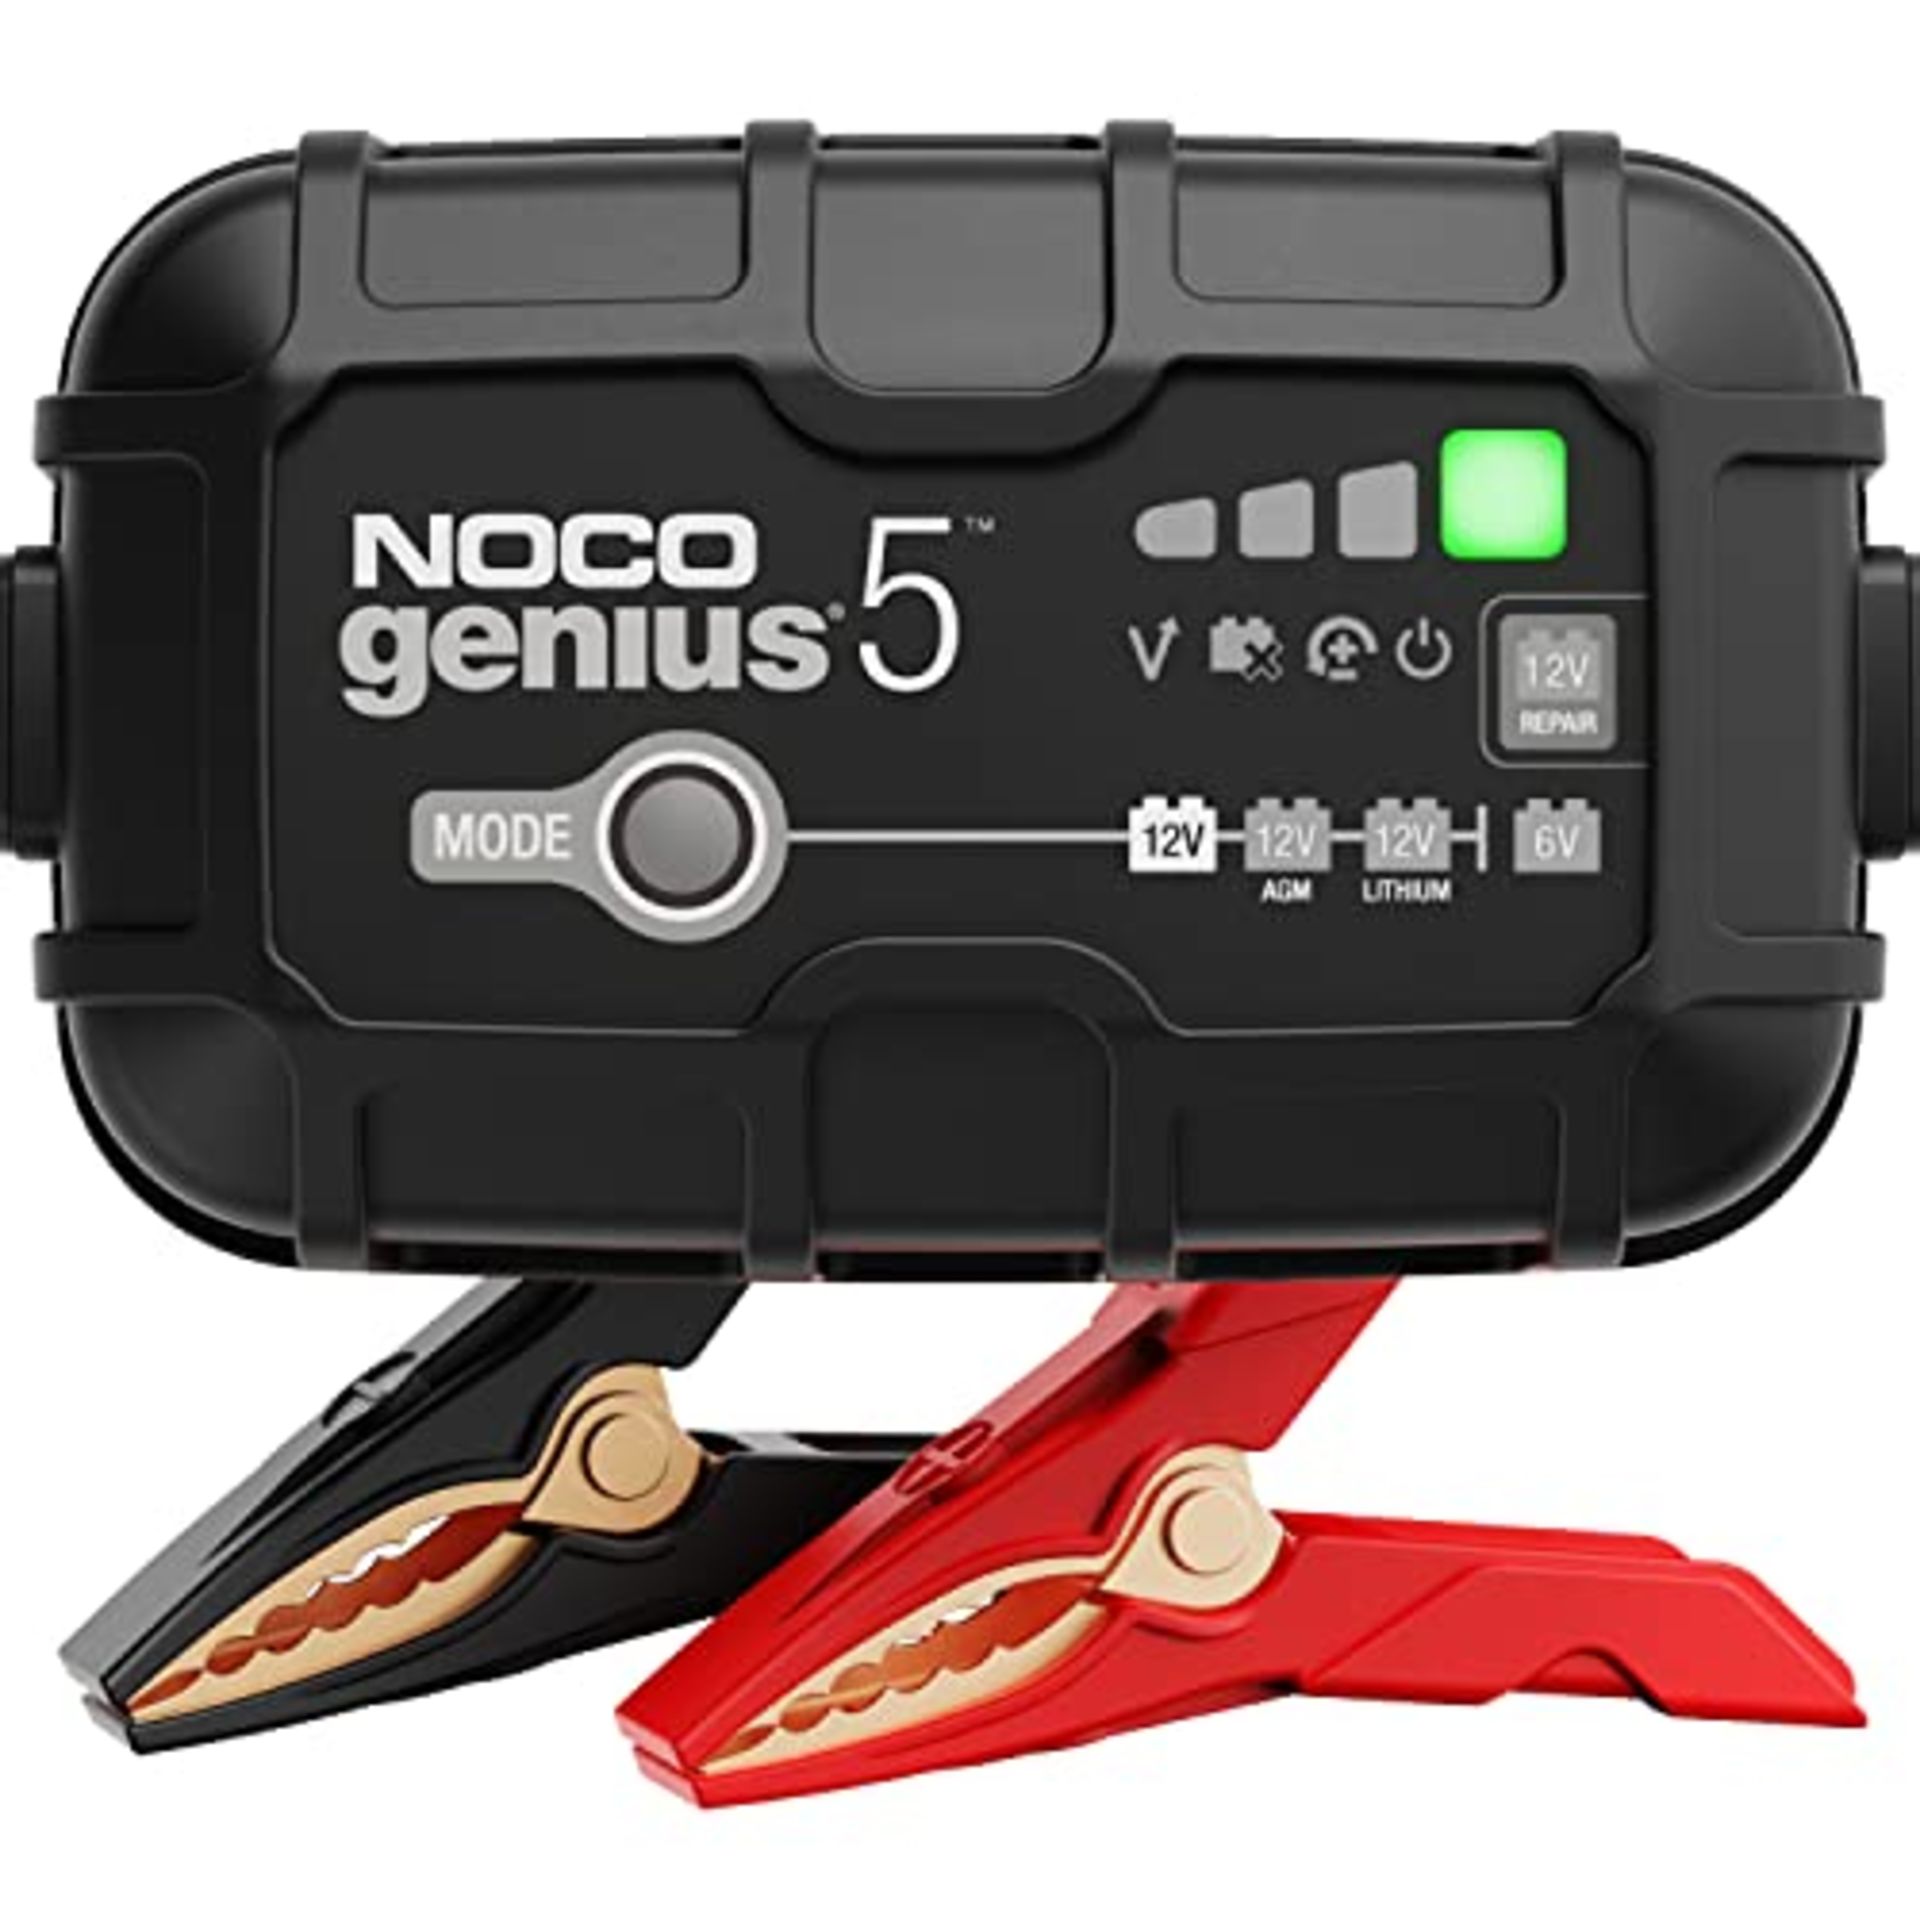 RRP £79.00 NOCO GENIUS5UK, 5A Car Battery Charger, 6V and 12V Portable Smart Charger, Battery Mai - Image 3 of 10